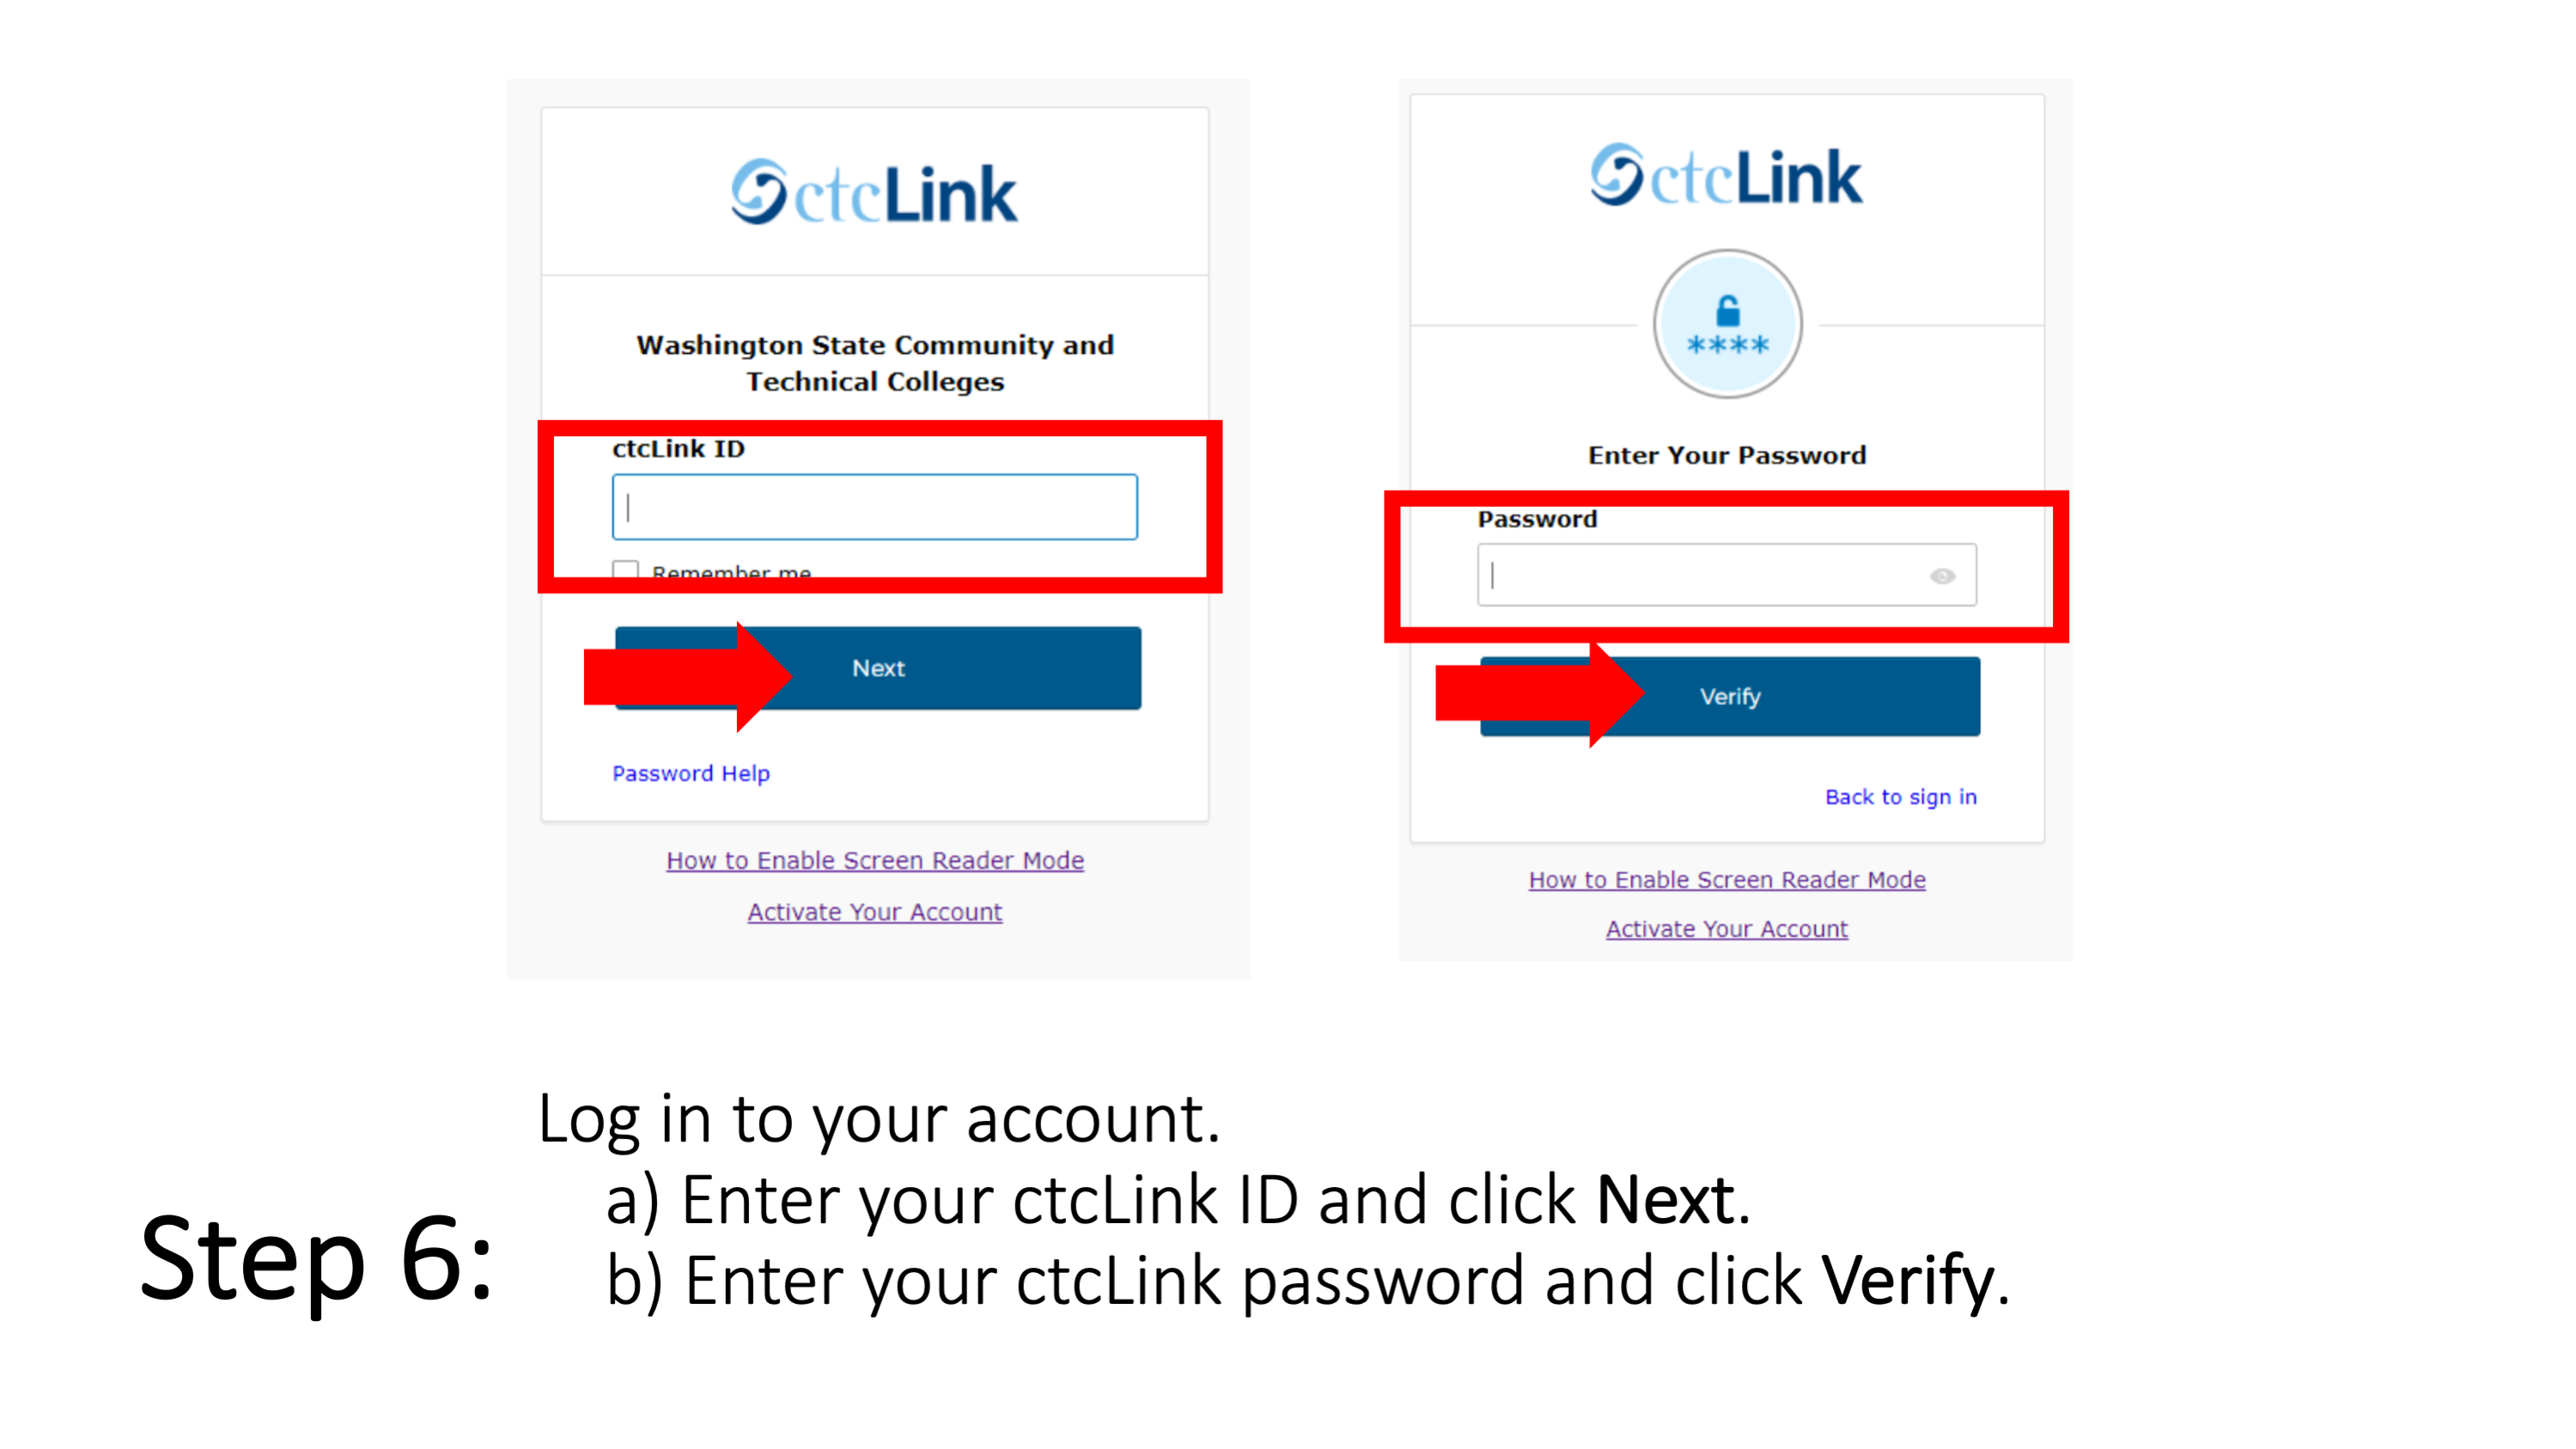 Step 6 - Log in to your account